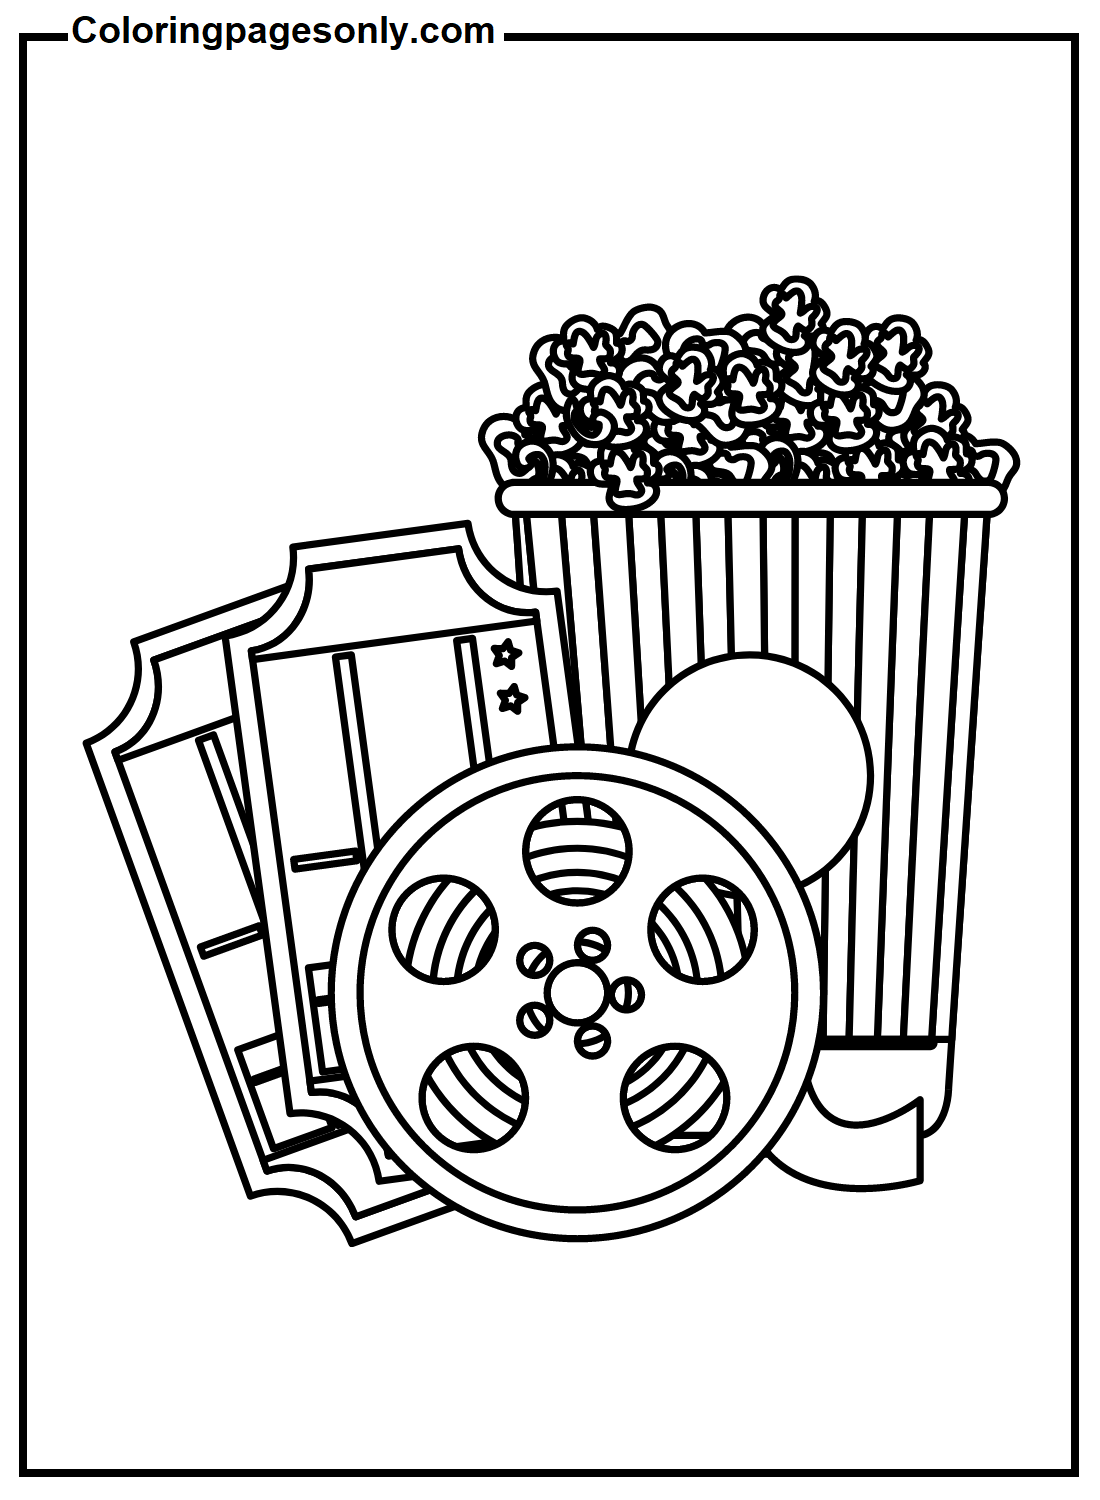 Cinema Popcorn for Kids Coloring Page